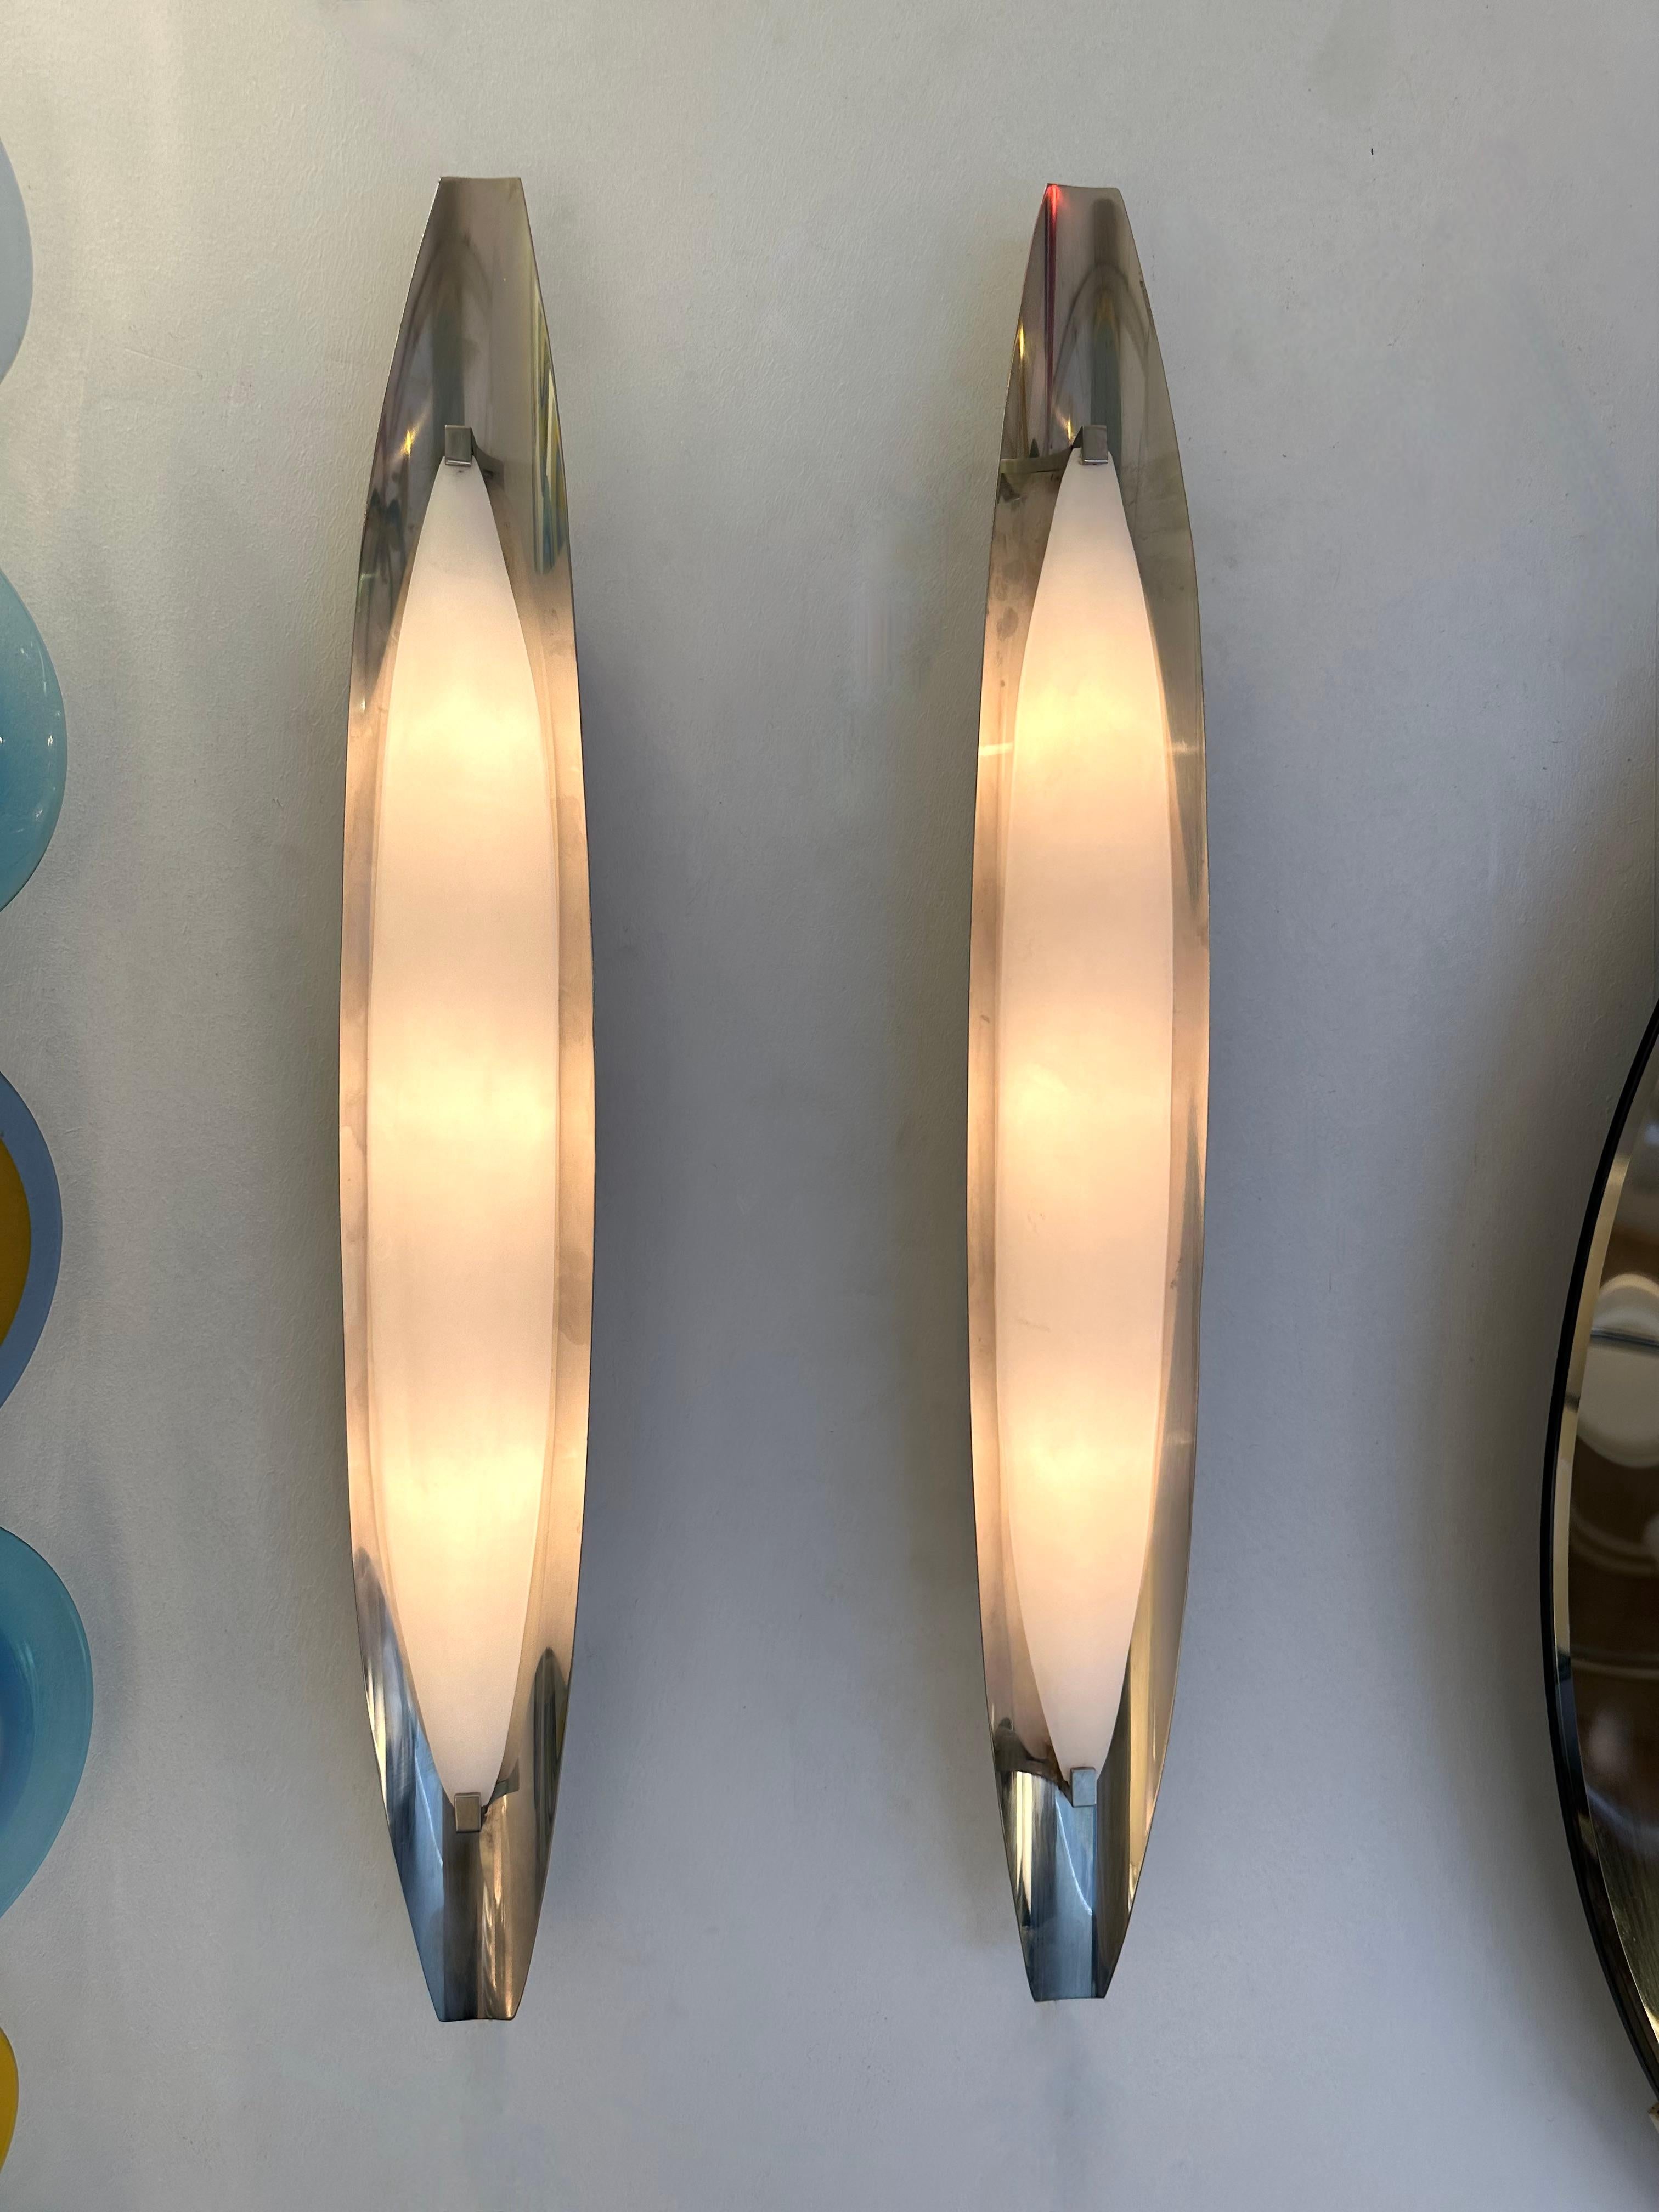 Pair of Metal and Opaline Glass Sconces mod. 2254 by Fontana Arte, Italy, 1960s For Sale 2